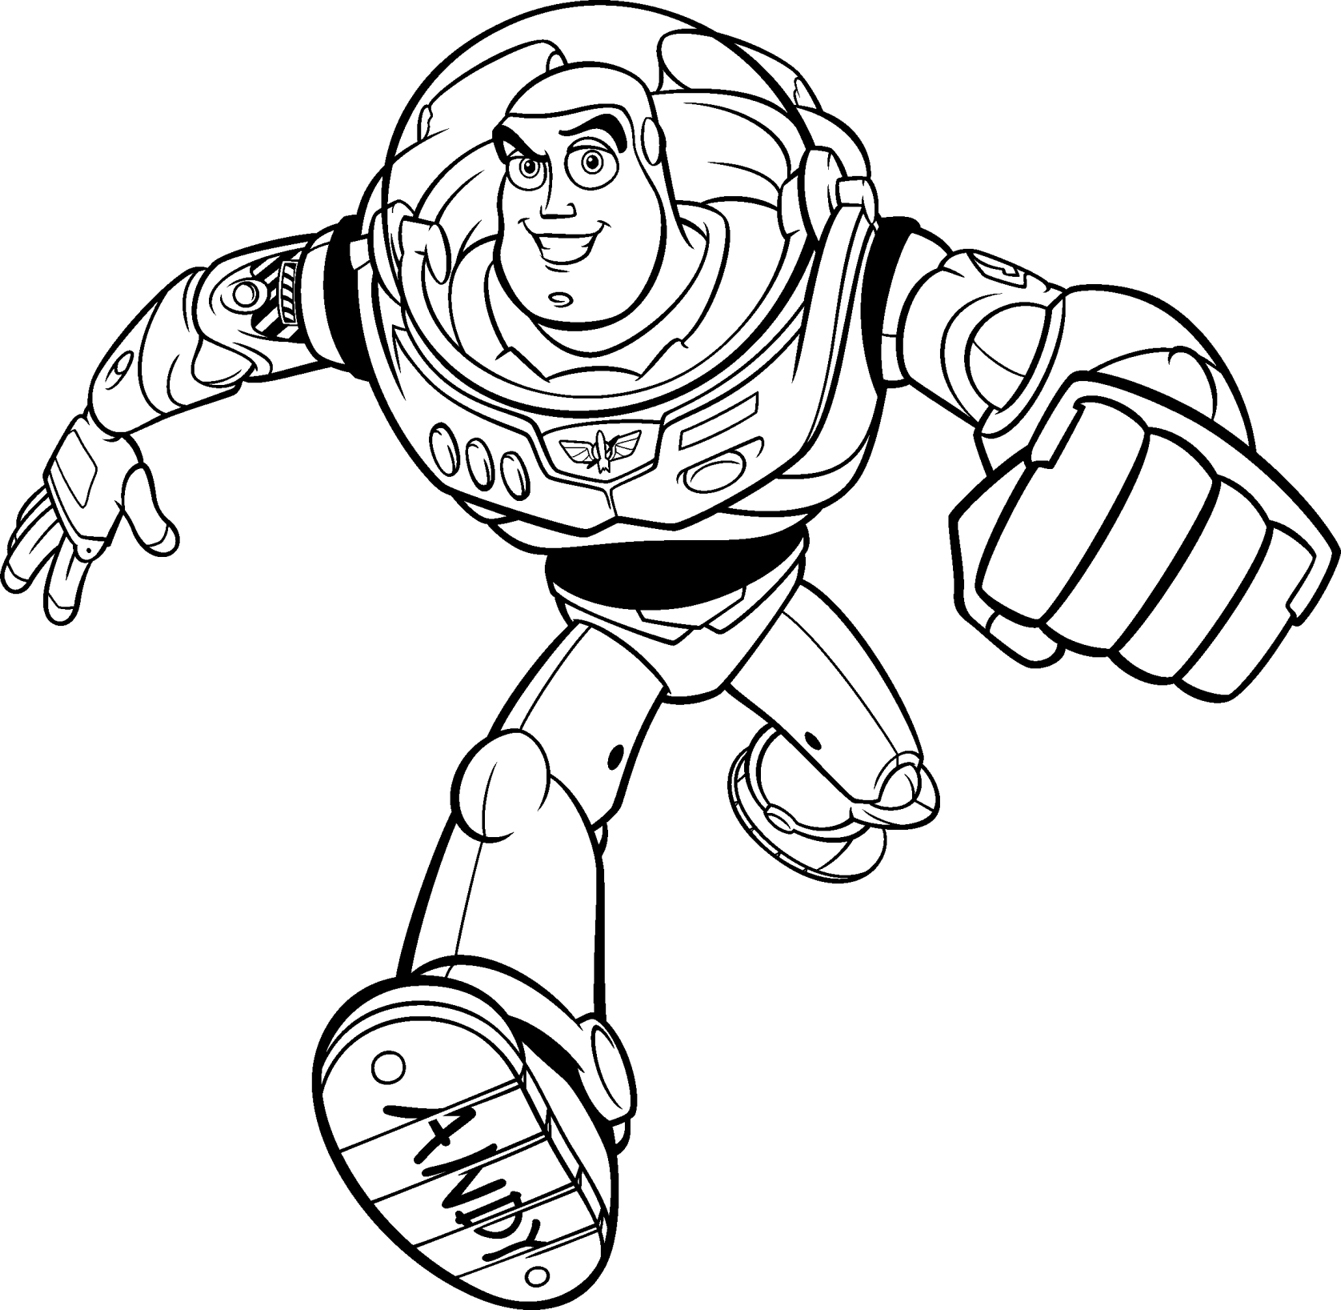  Buzz Lightyear Toy Story Coloring Pages